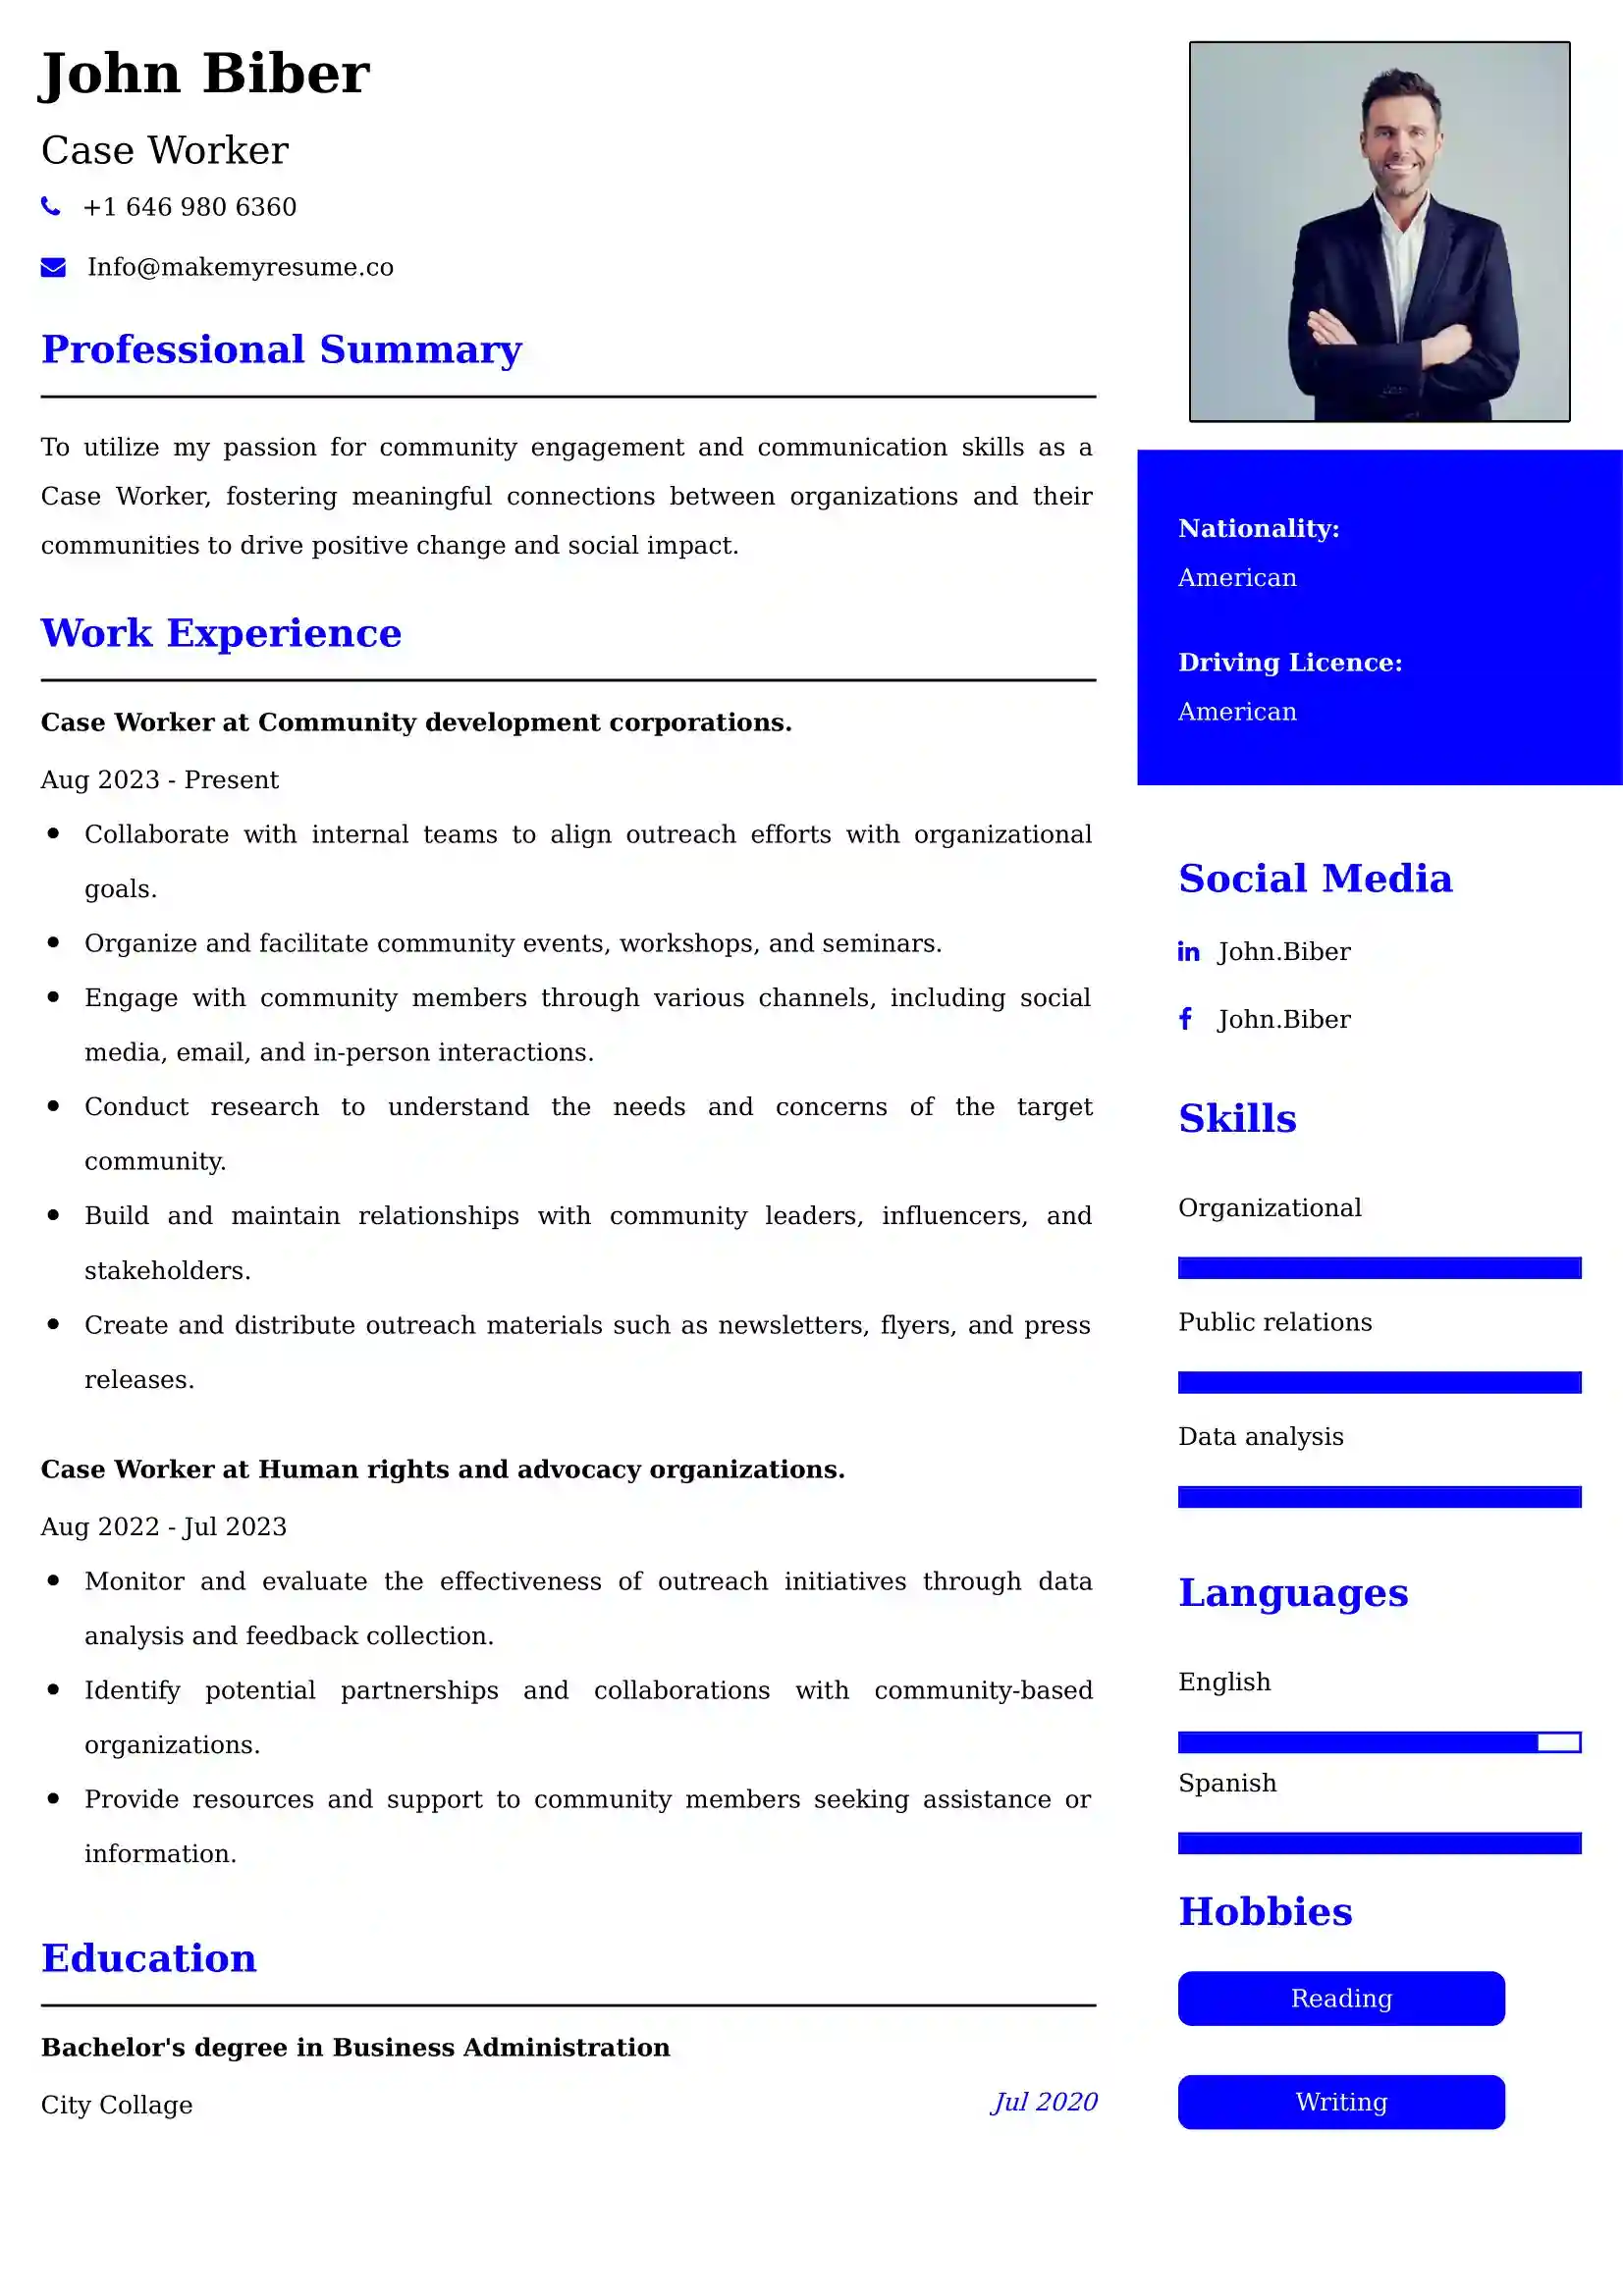 Case Worker Resume Examples - Brazilian Format, Latest Template